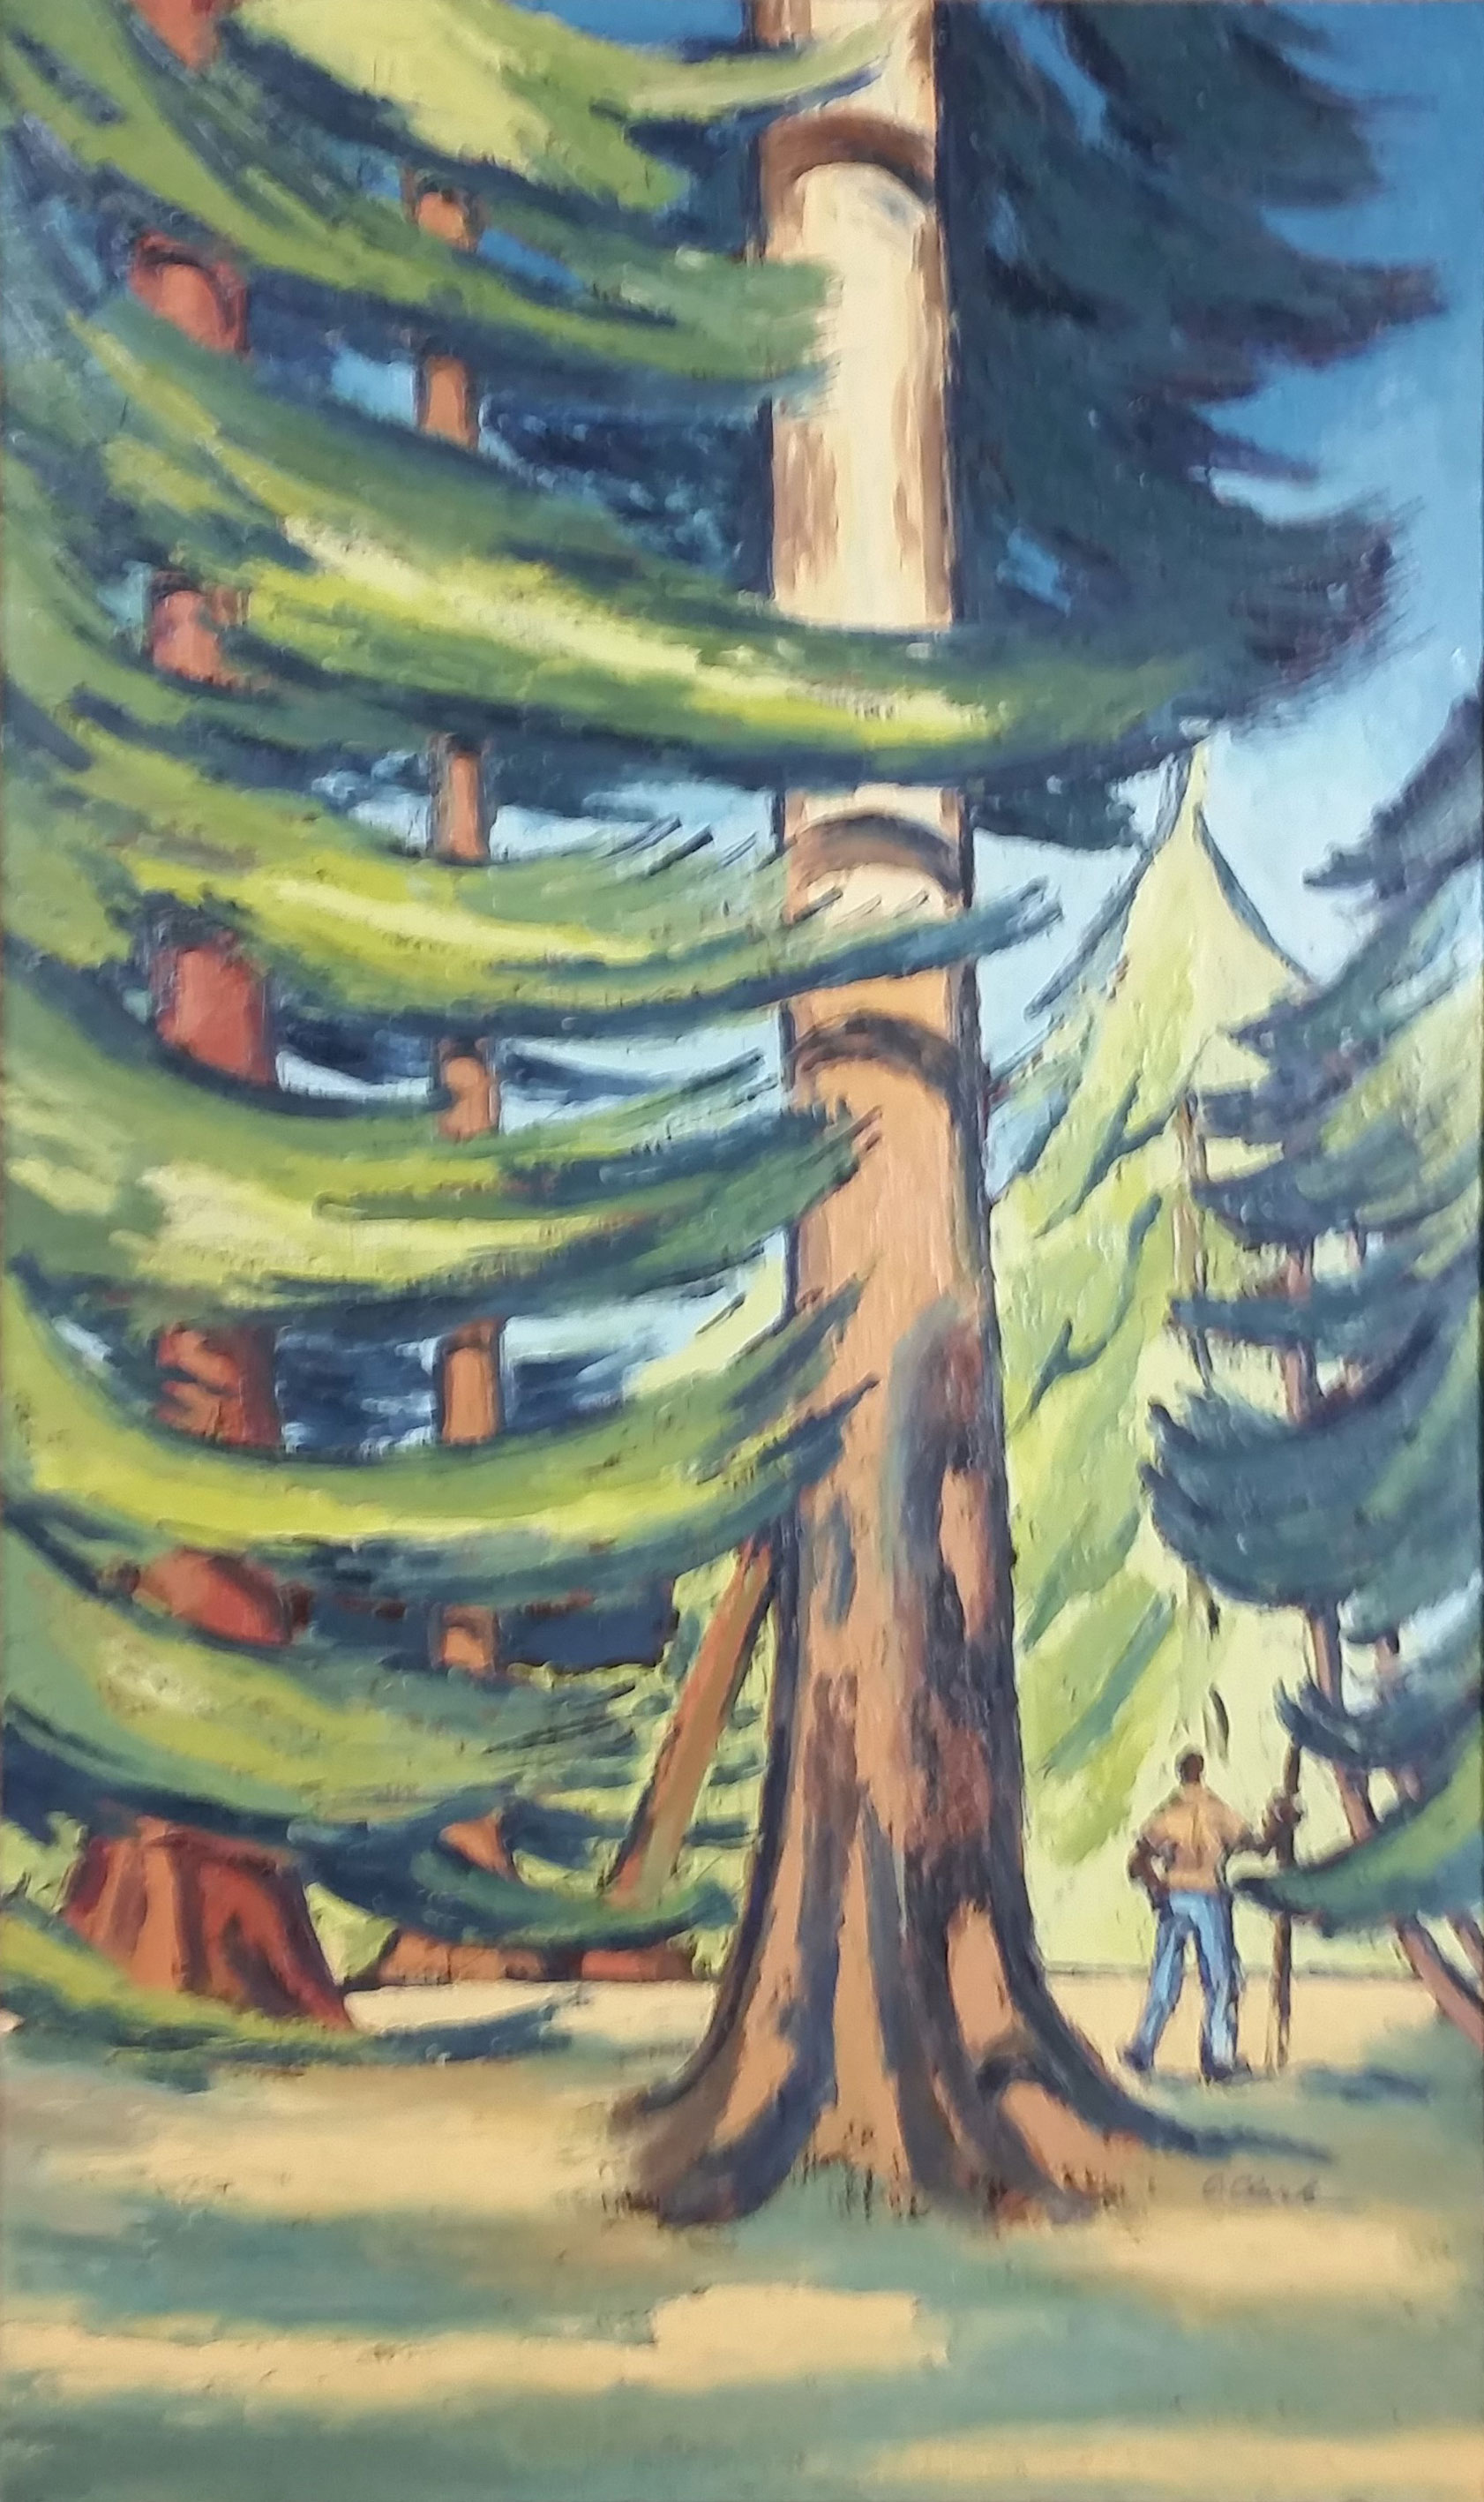 Man with Redwoods